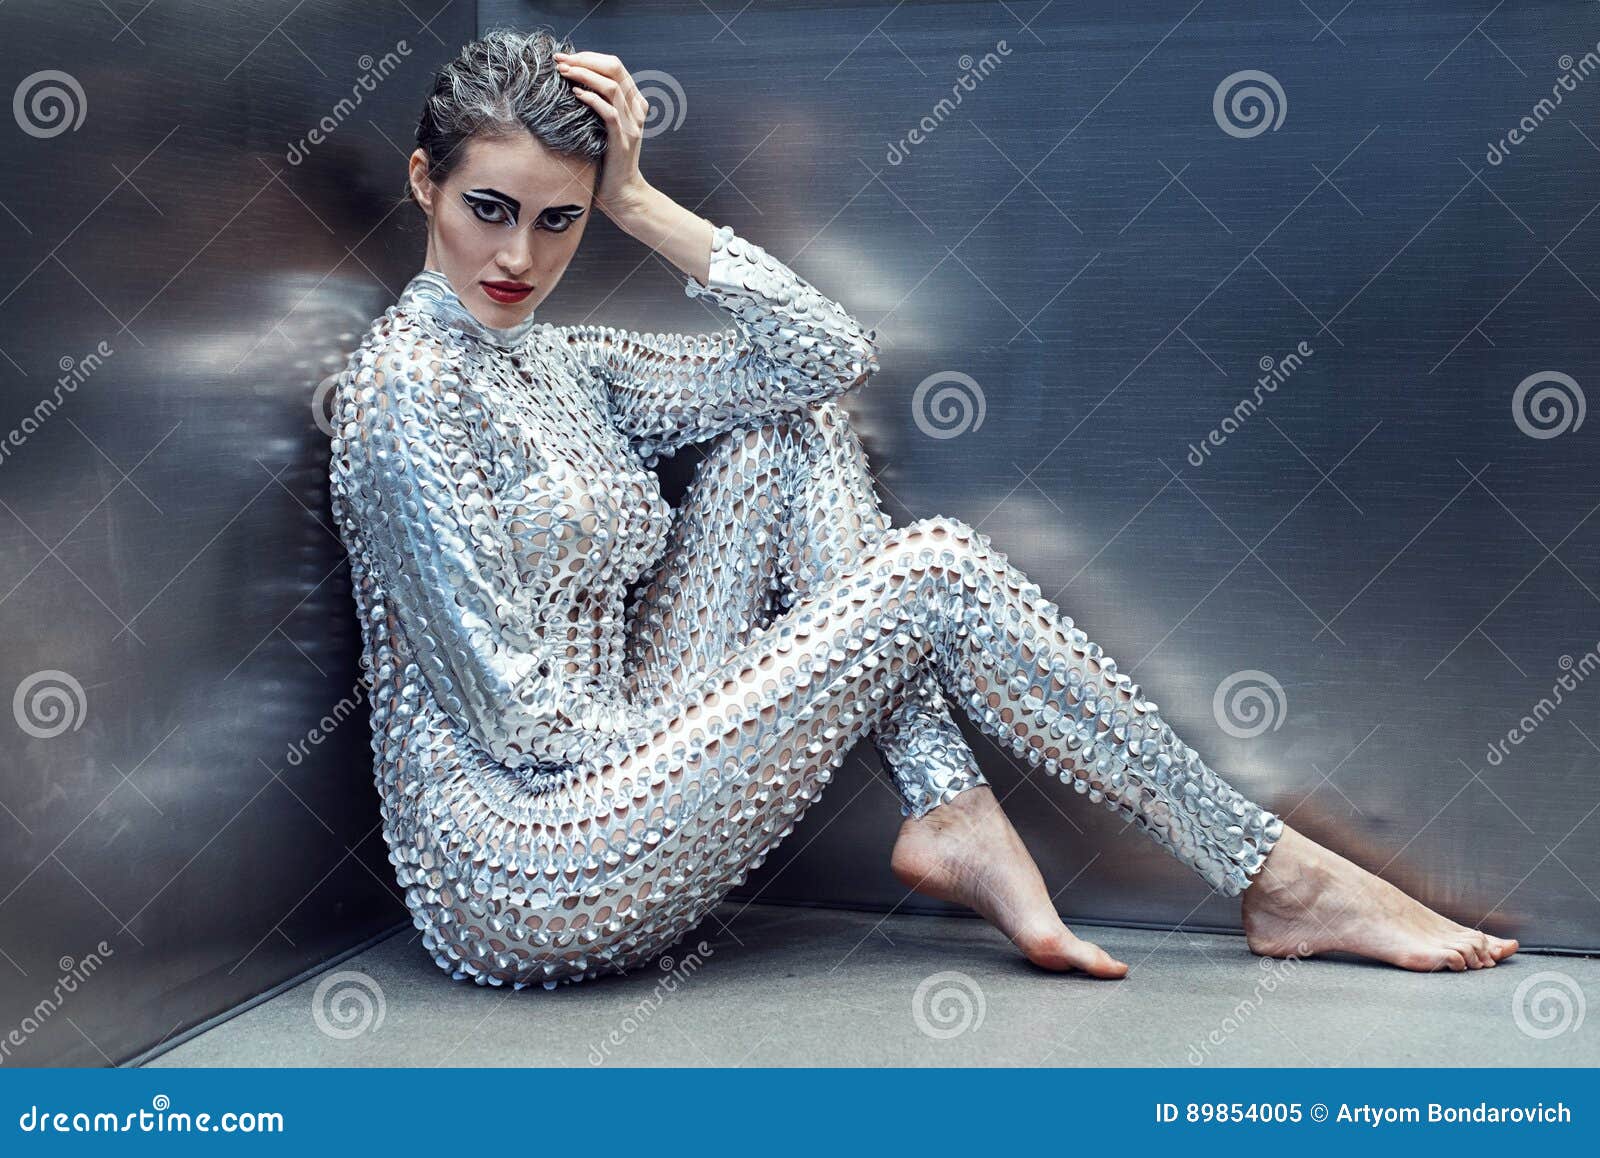 11,139 Woman Futuristic Costume Images, Stock Photos, 3D objects, & Vectors